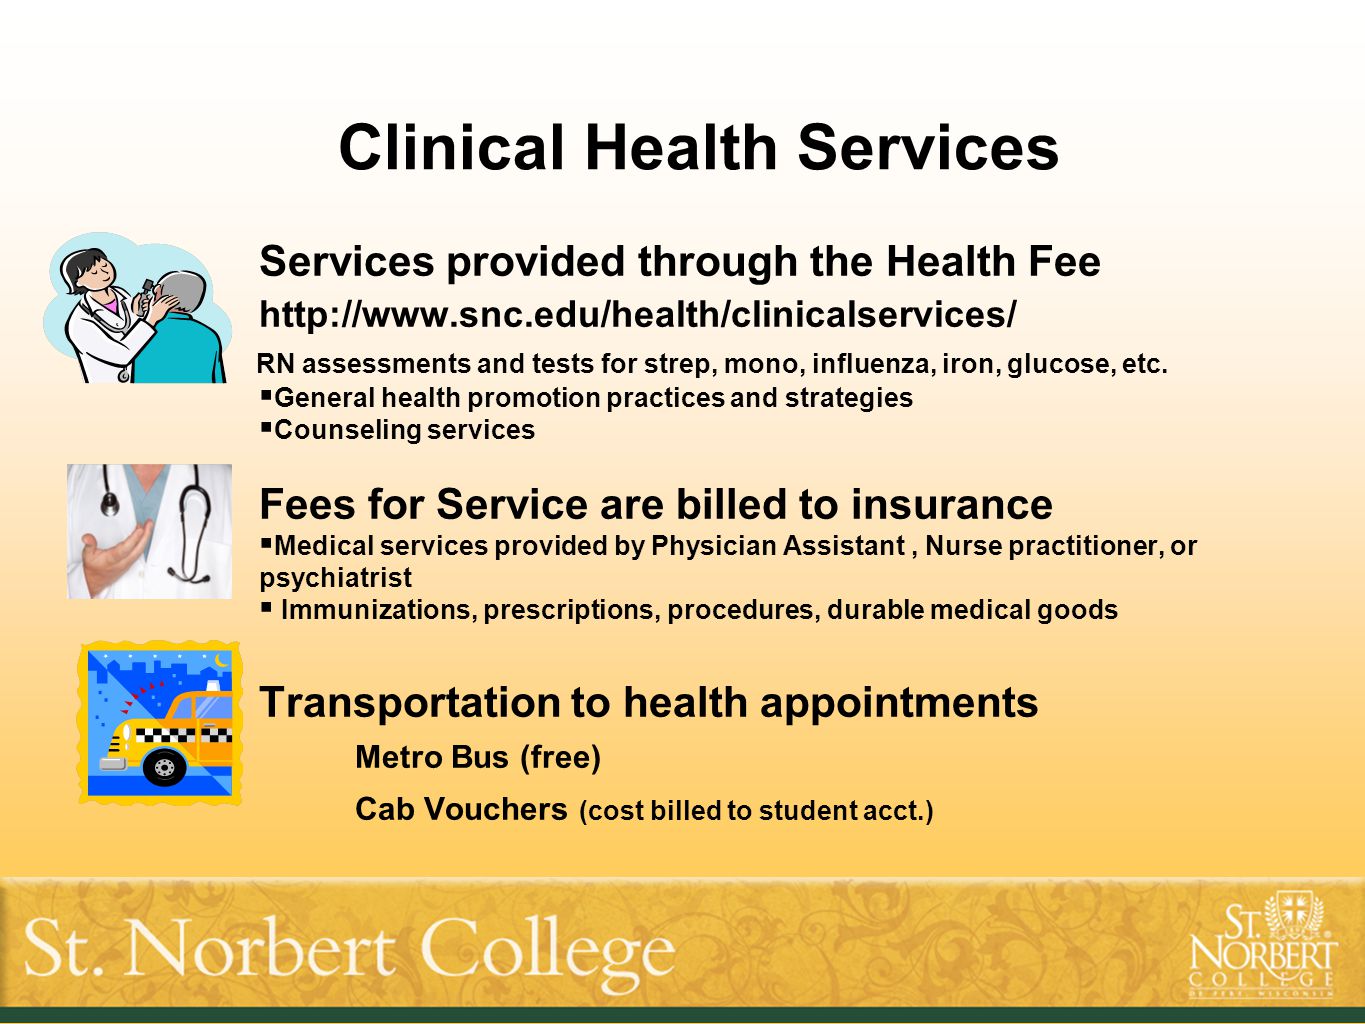 Clinical Health Services Services provided through the Health Fee   RN assessments and tests for strep, mono, influenza, iron, glucose, etc.